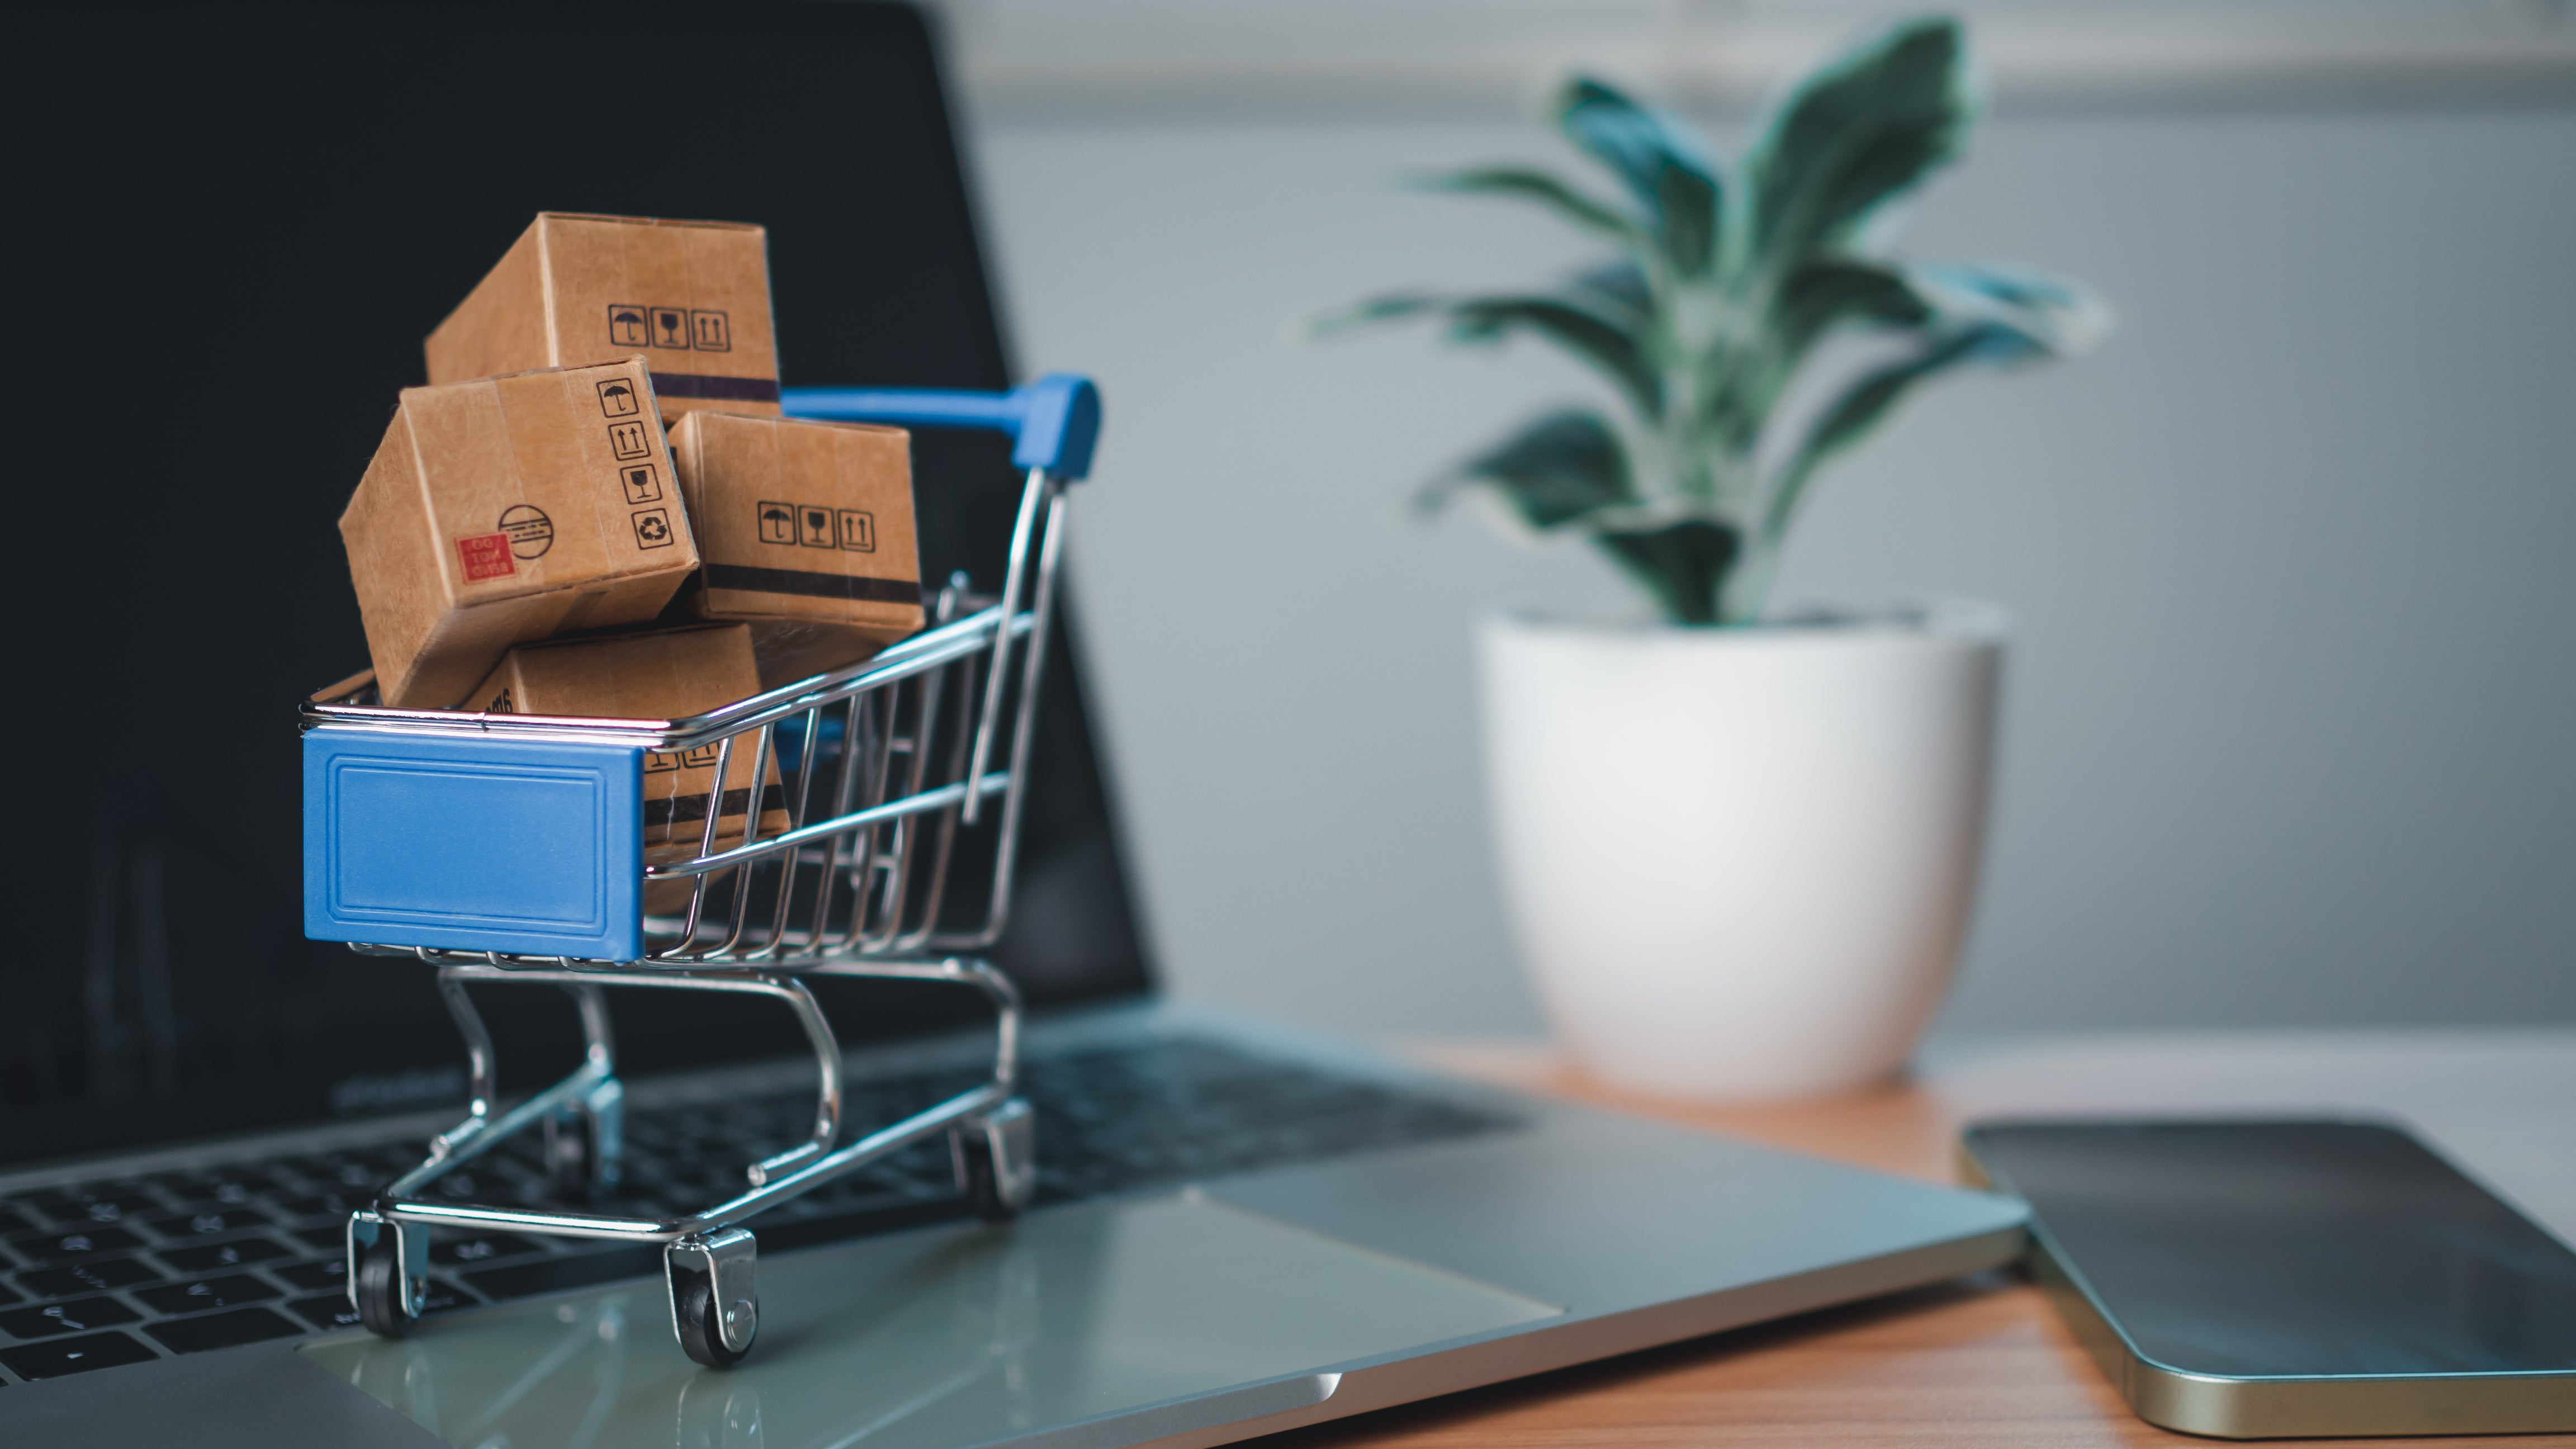 <p>A new shopping era: Leveraging appropriate technologies and understanding their applications is key to an omnichannel approach that aligns with a new generation </p>